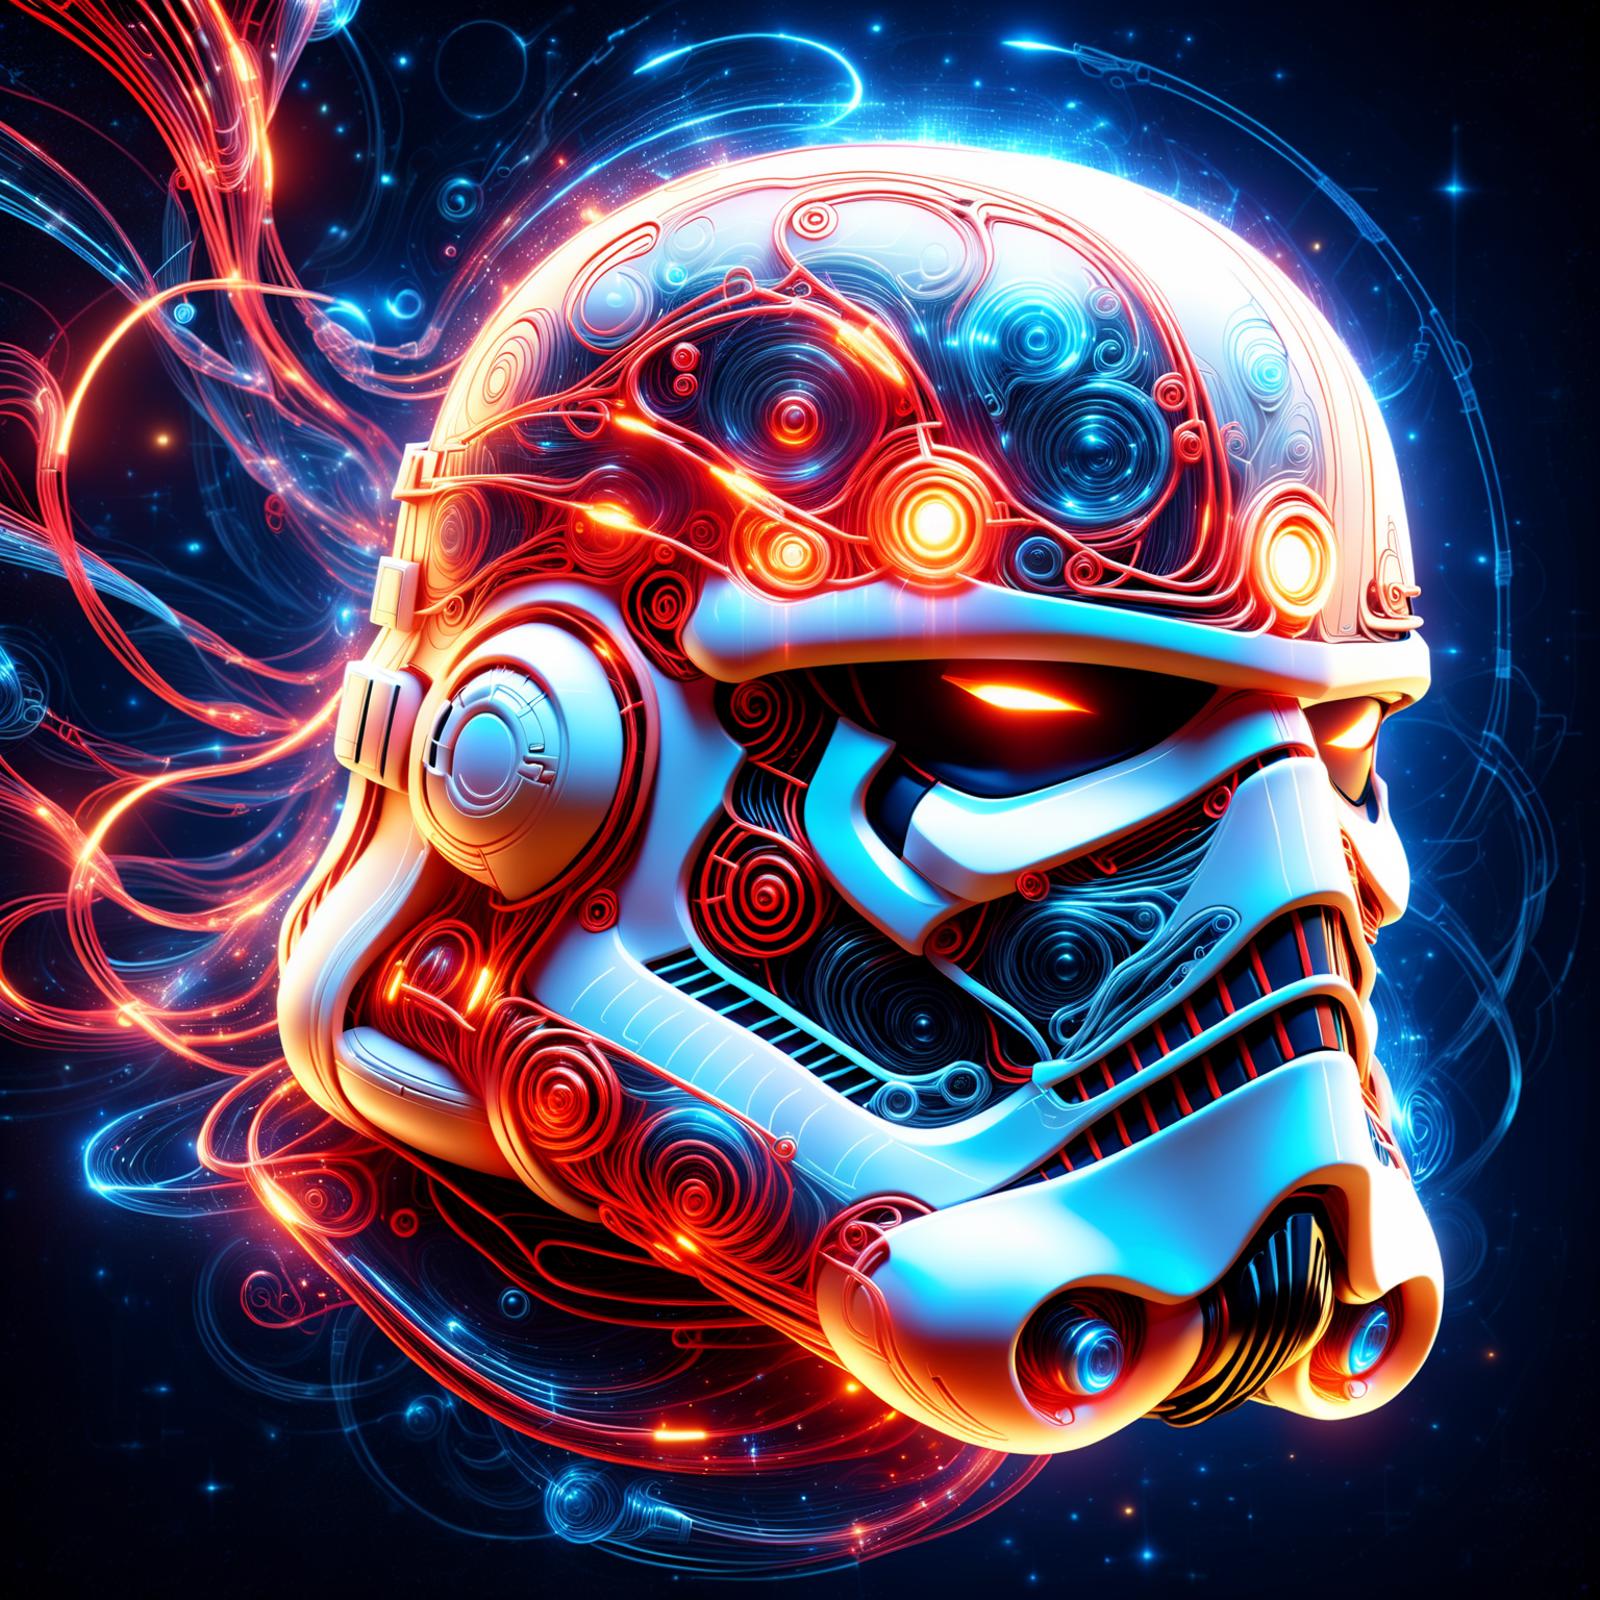 A futuristic and metallic Star Wars stormtrooper head with glowing red and blue neon lights.